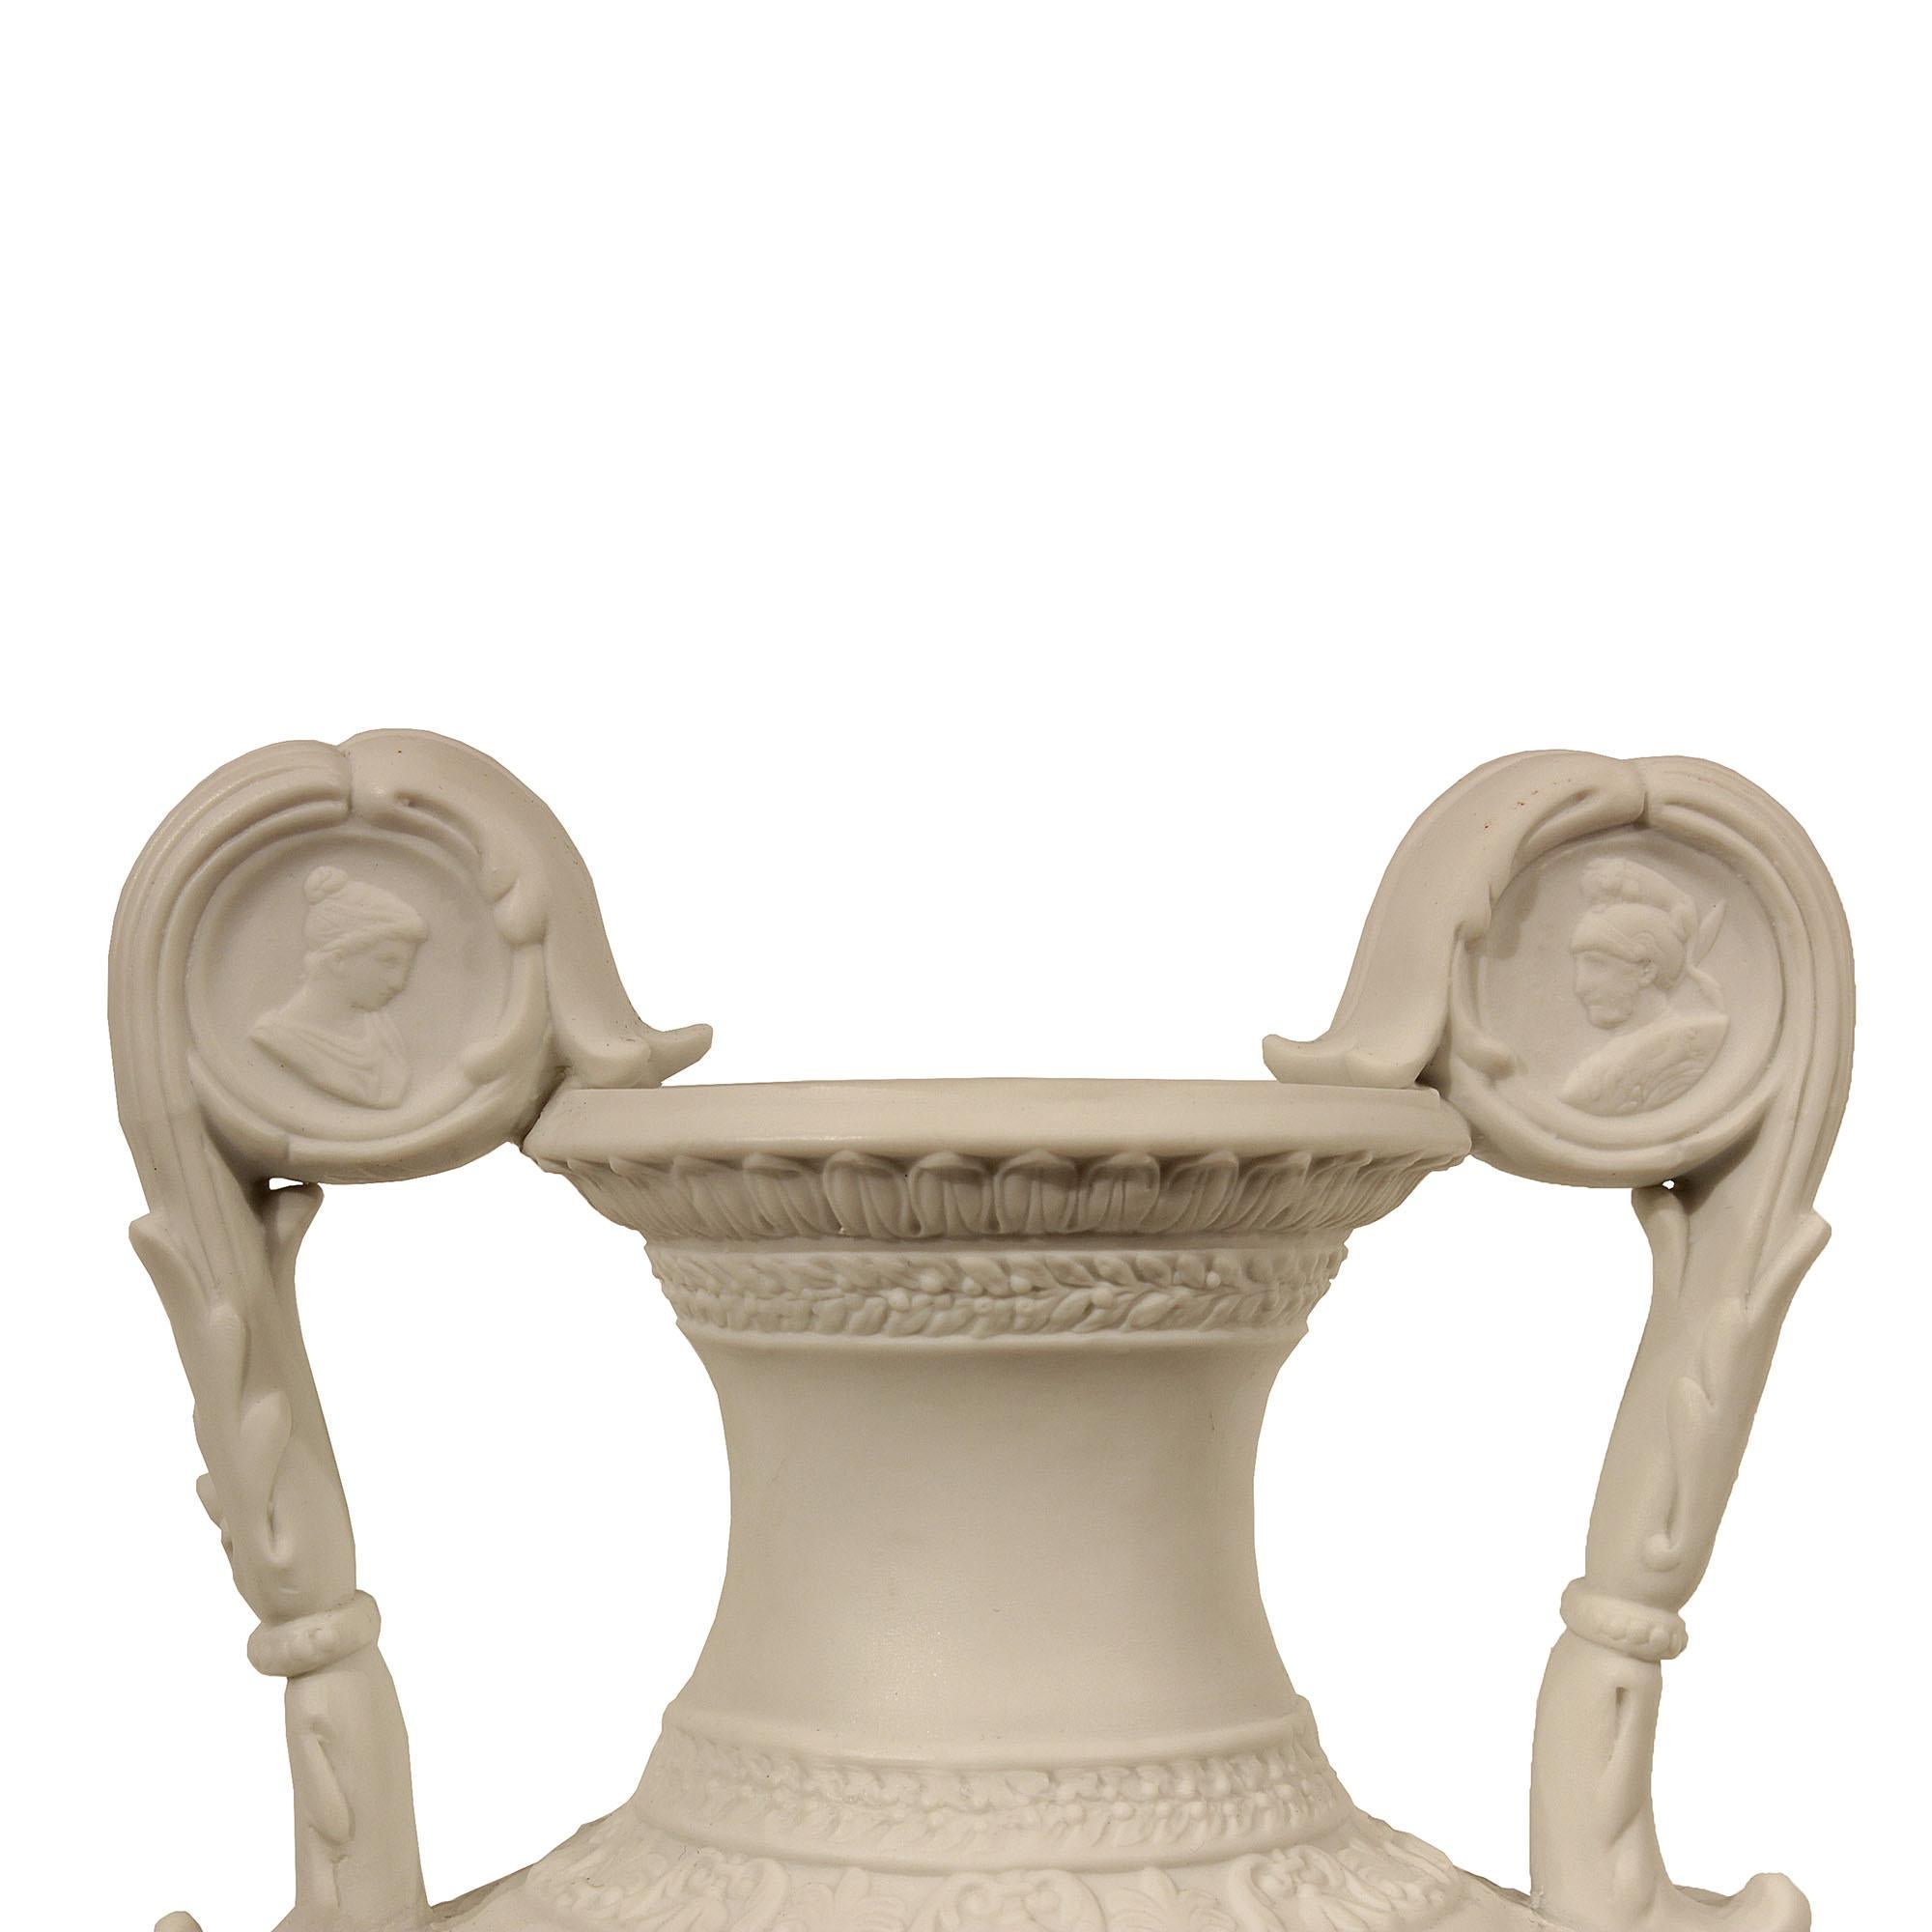 Pair of 19th Century Louis XVI Style Biscuit De Sèvres Porcelain Urns In Good Condition For Sale In West Palm Beach, FL